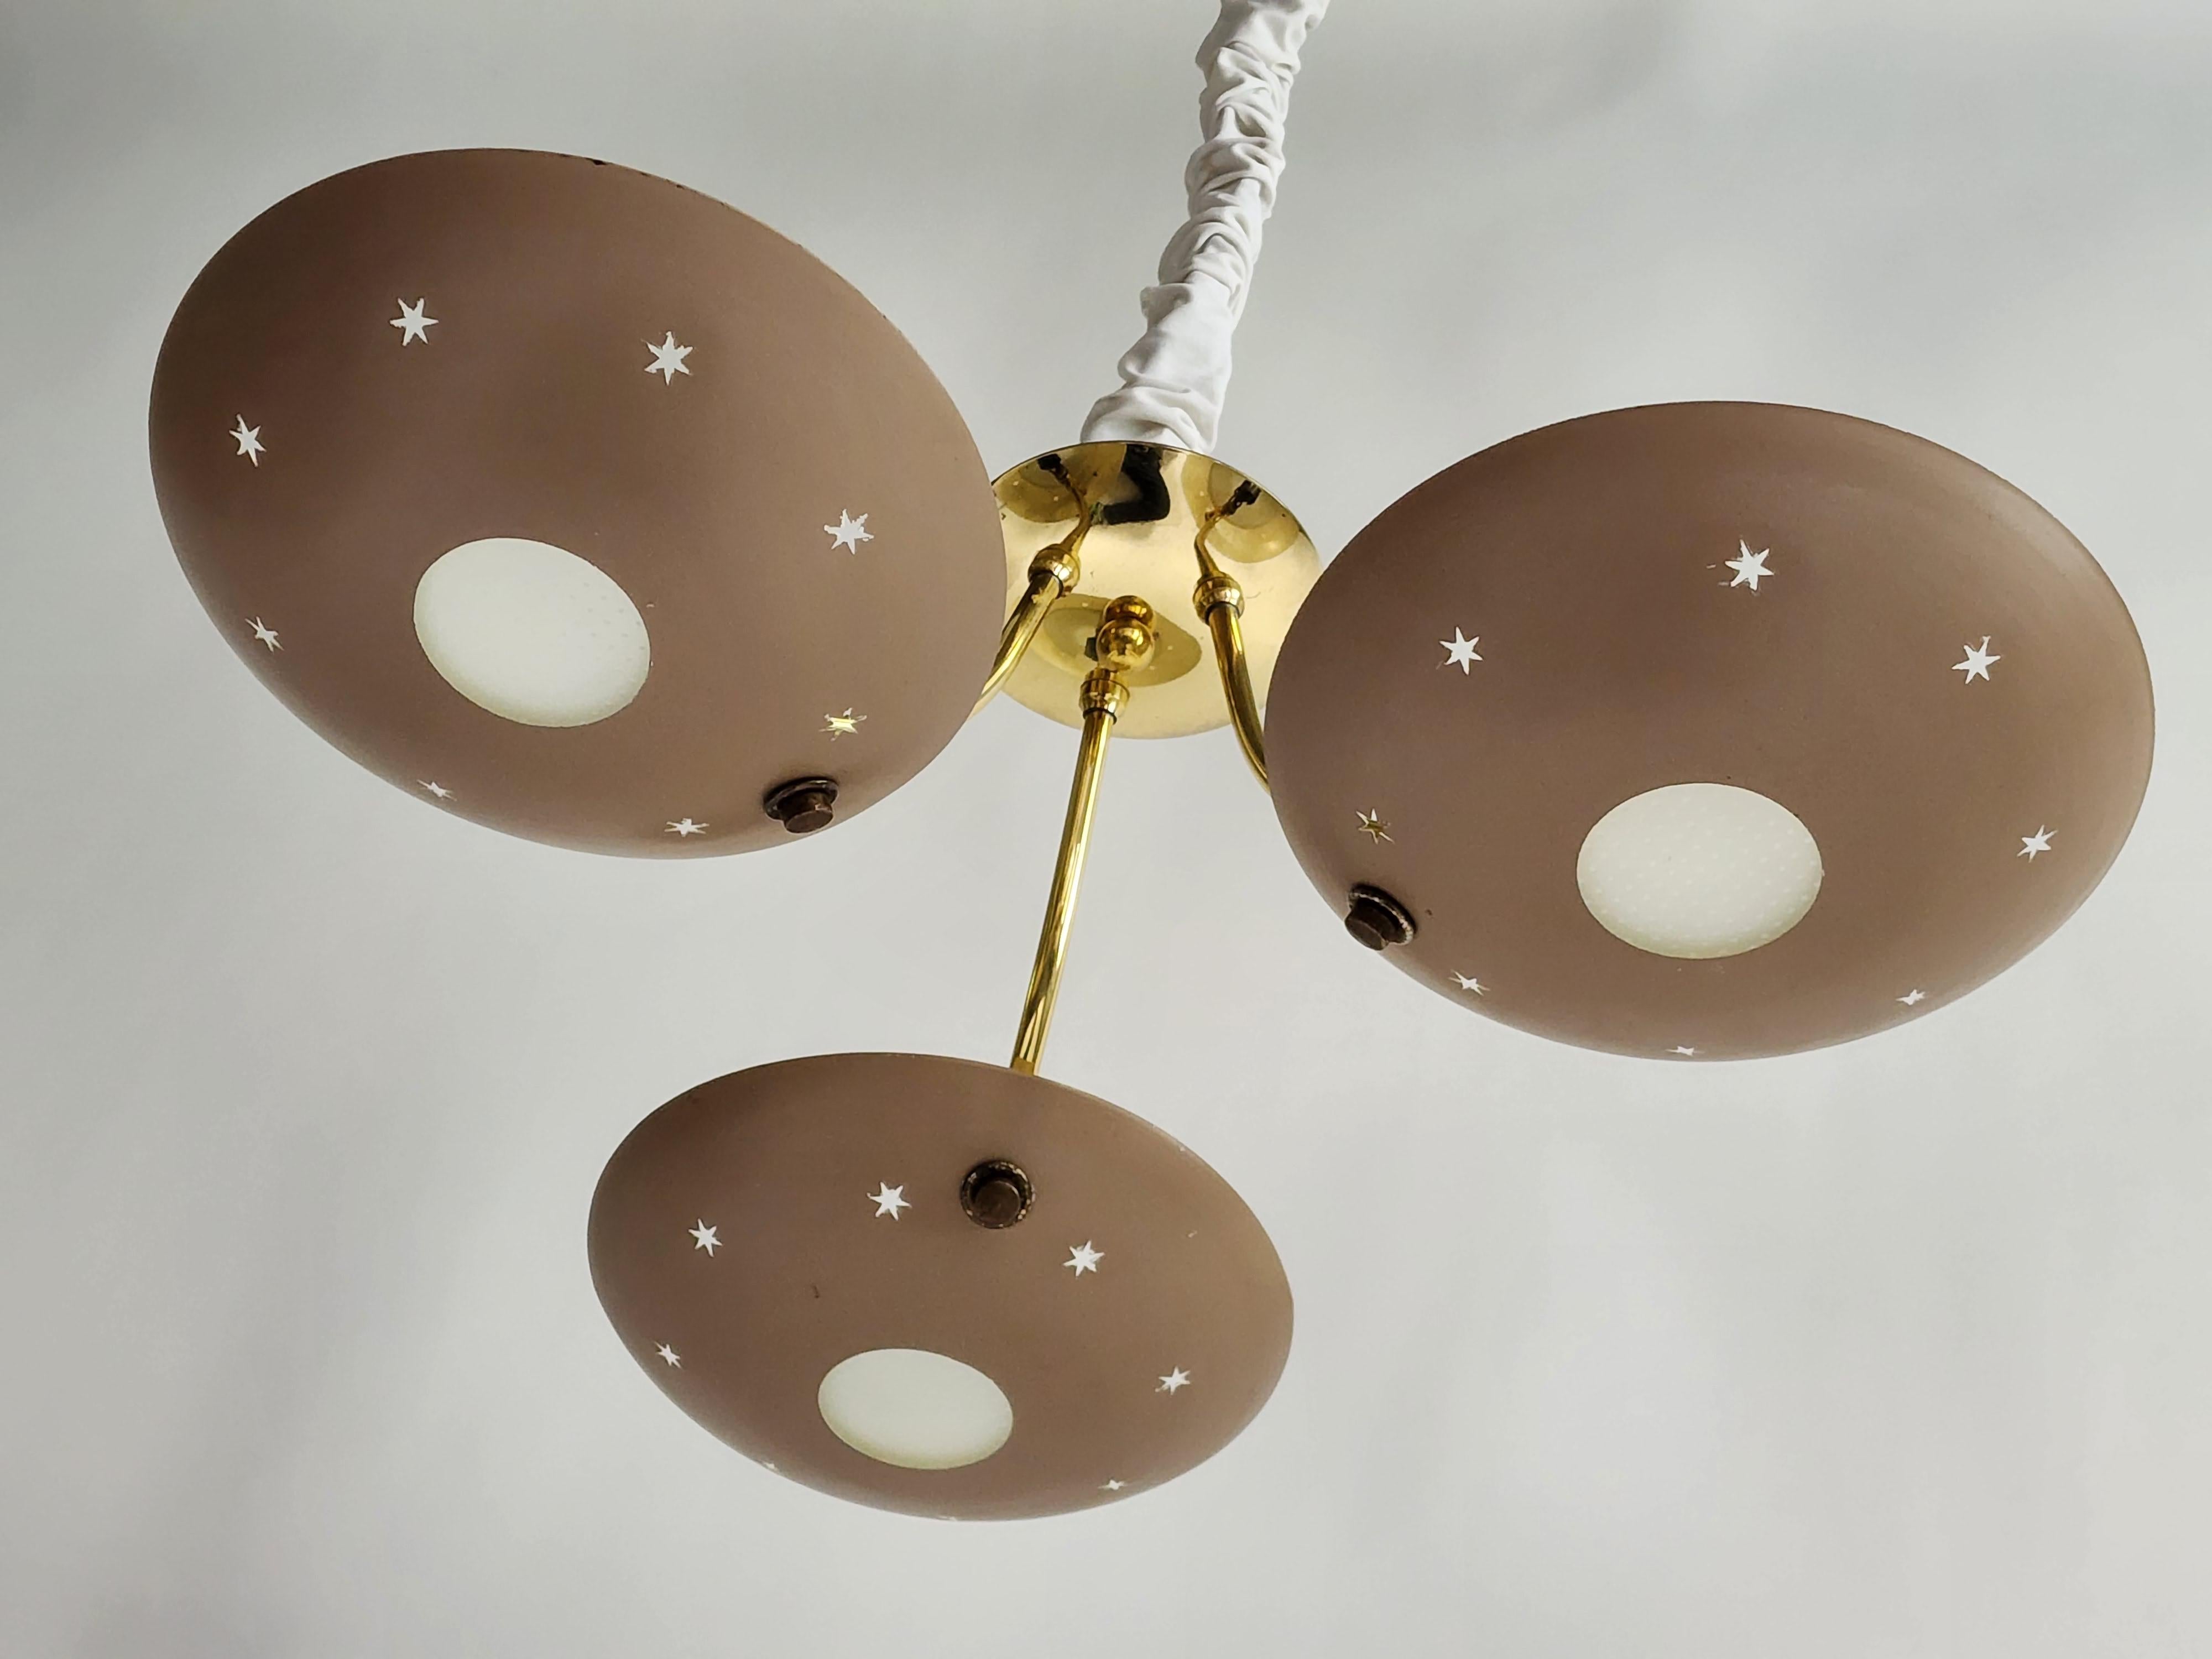 Enameled aluminium  shade with a  pierced star motif  on a brass structure .

Well made strudy construction . 

Each shade measure 9.5 in wide by 2 in high . Glass diffuser under .

3 Bakelite socket rated at 40 watt each 

 

